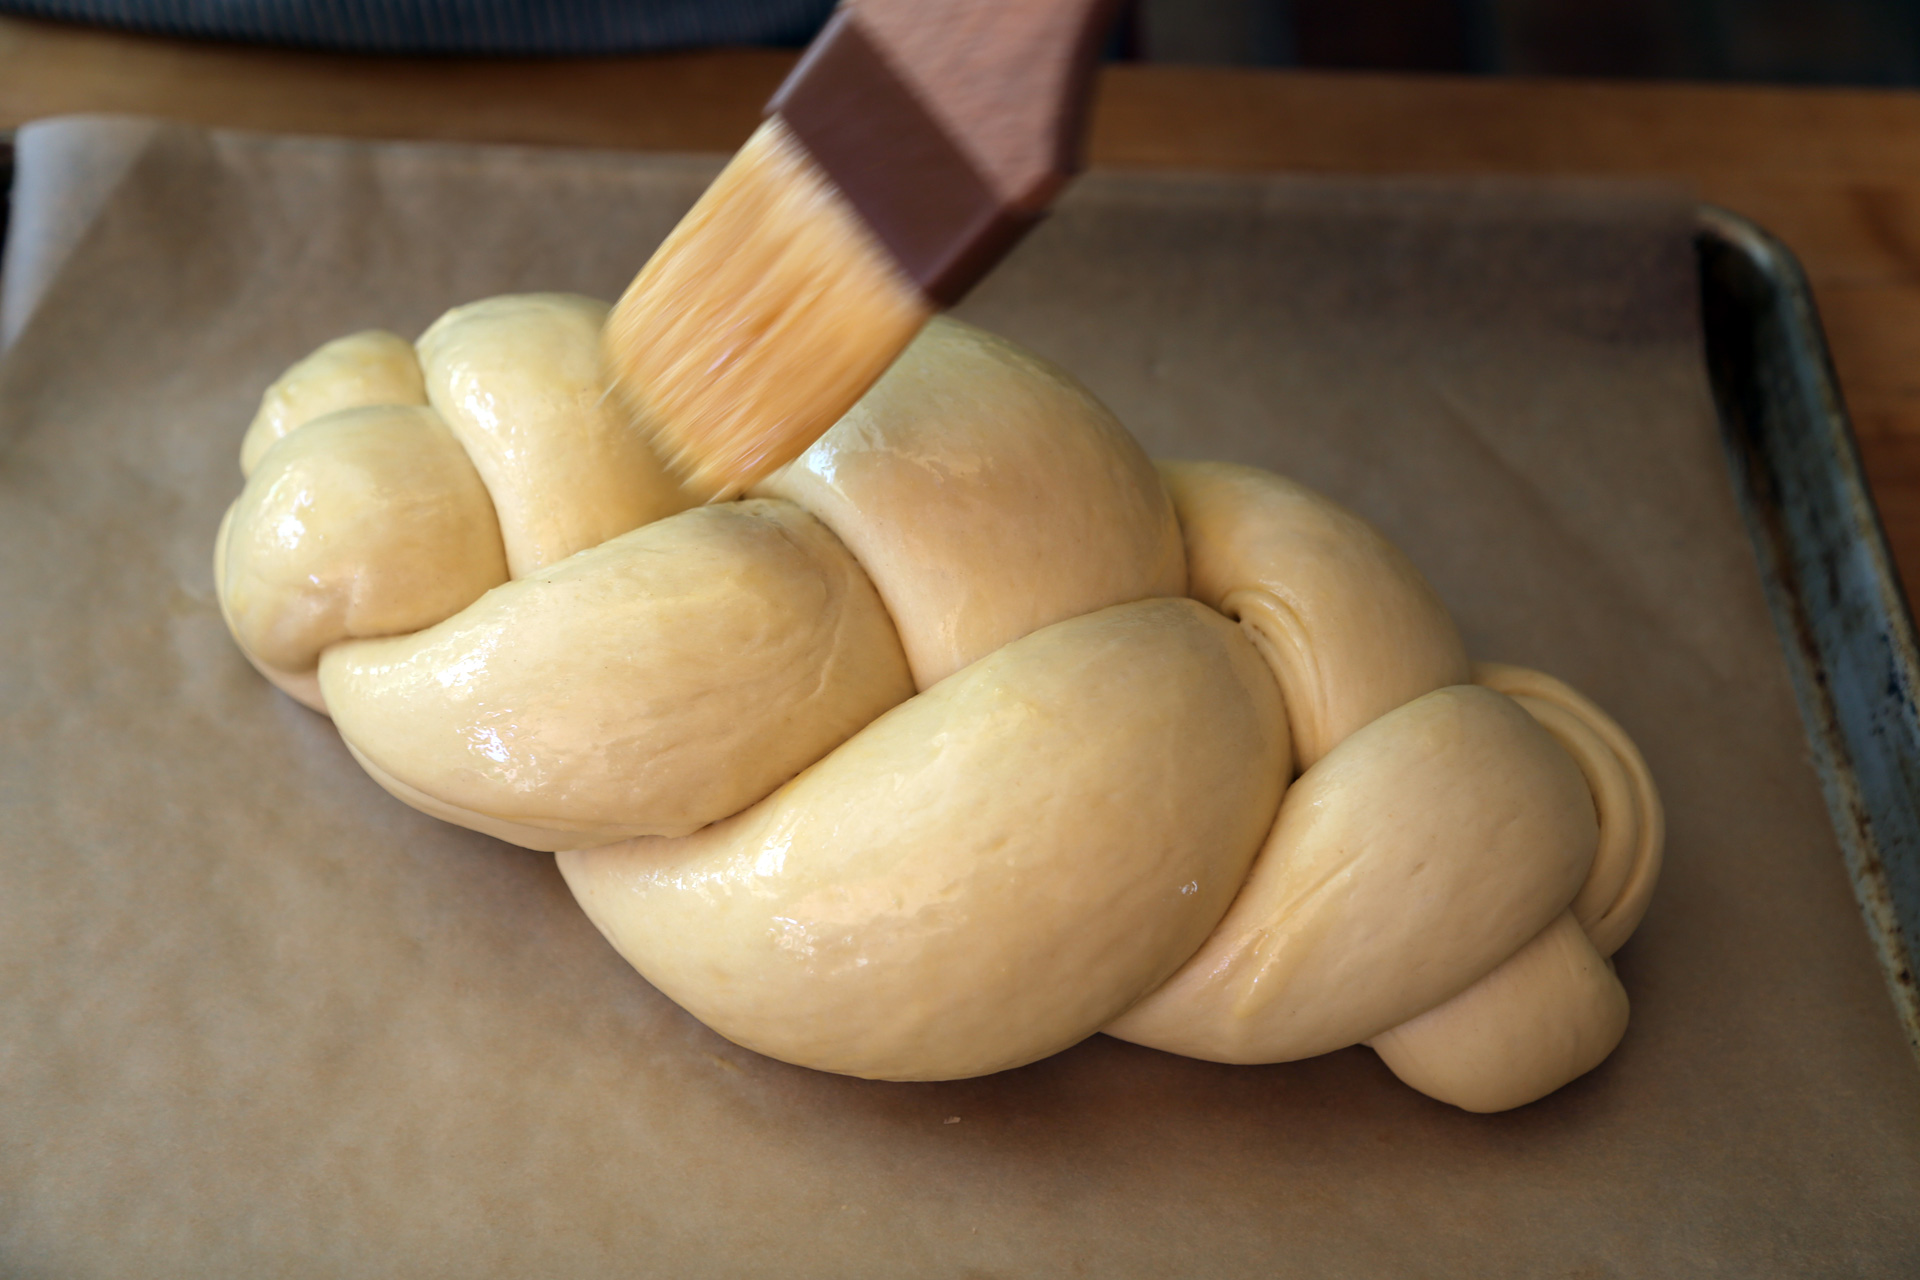 In a small bowl, whisk the remaining egg with 1 teaspoon water until well combined. Using a pastry brush, very gently brush the tops and sides of the challah with the egg wash.